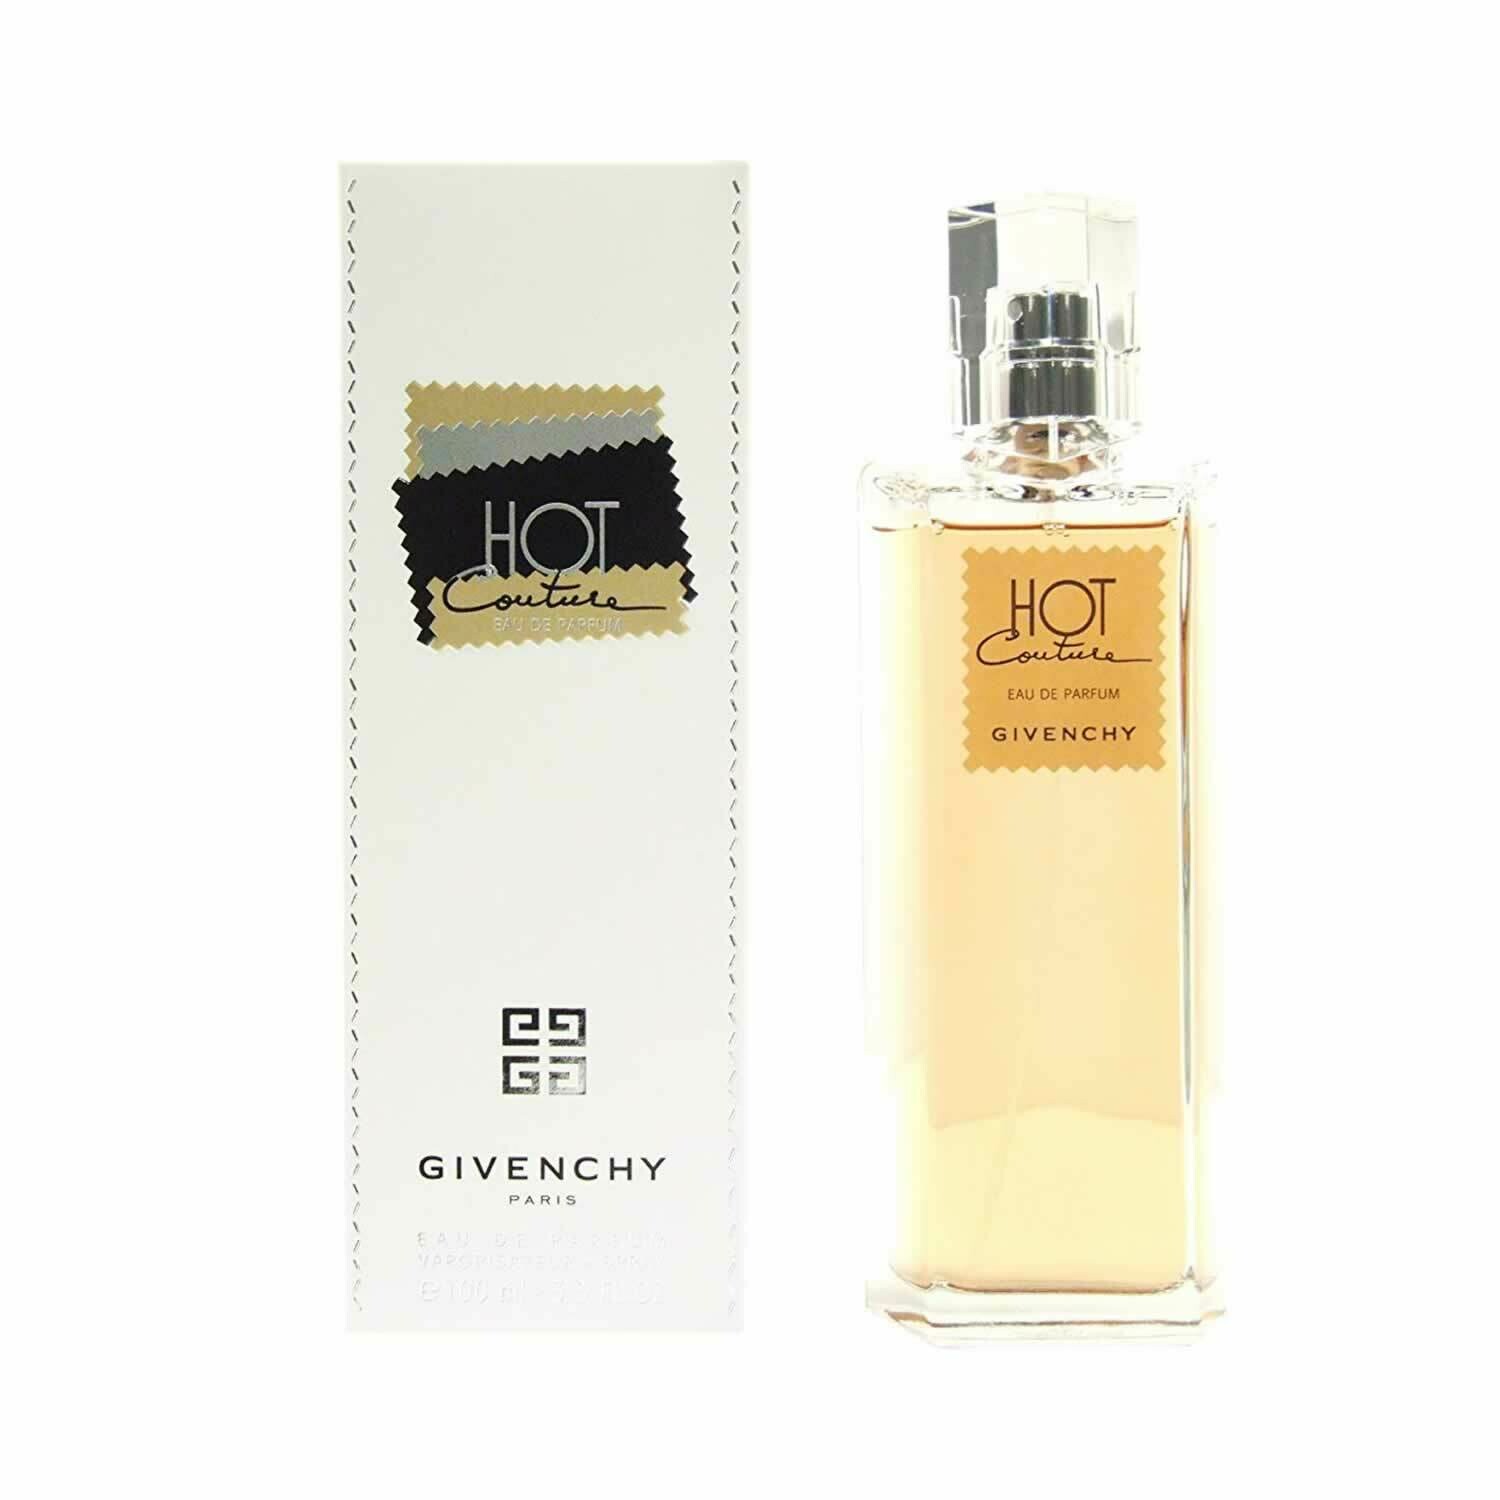 GIVENCHY HOT COUTURE EDP100ML WOMAN